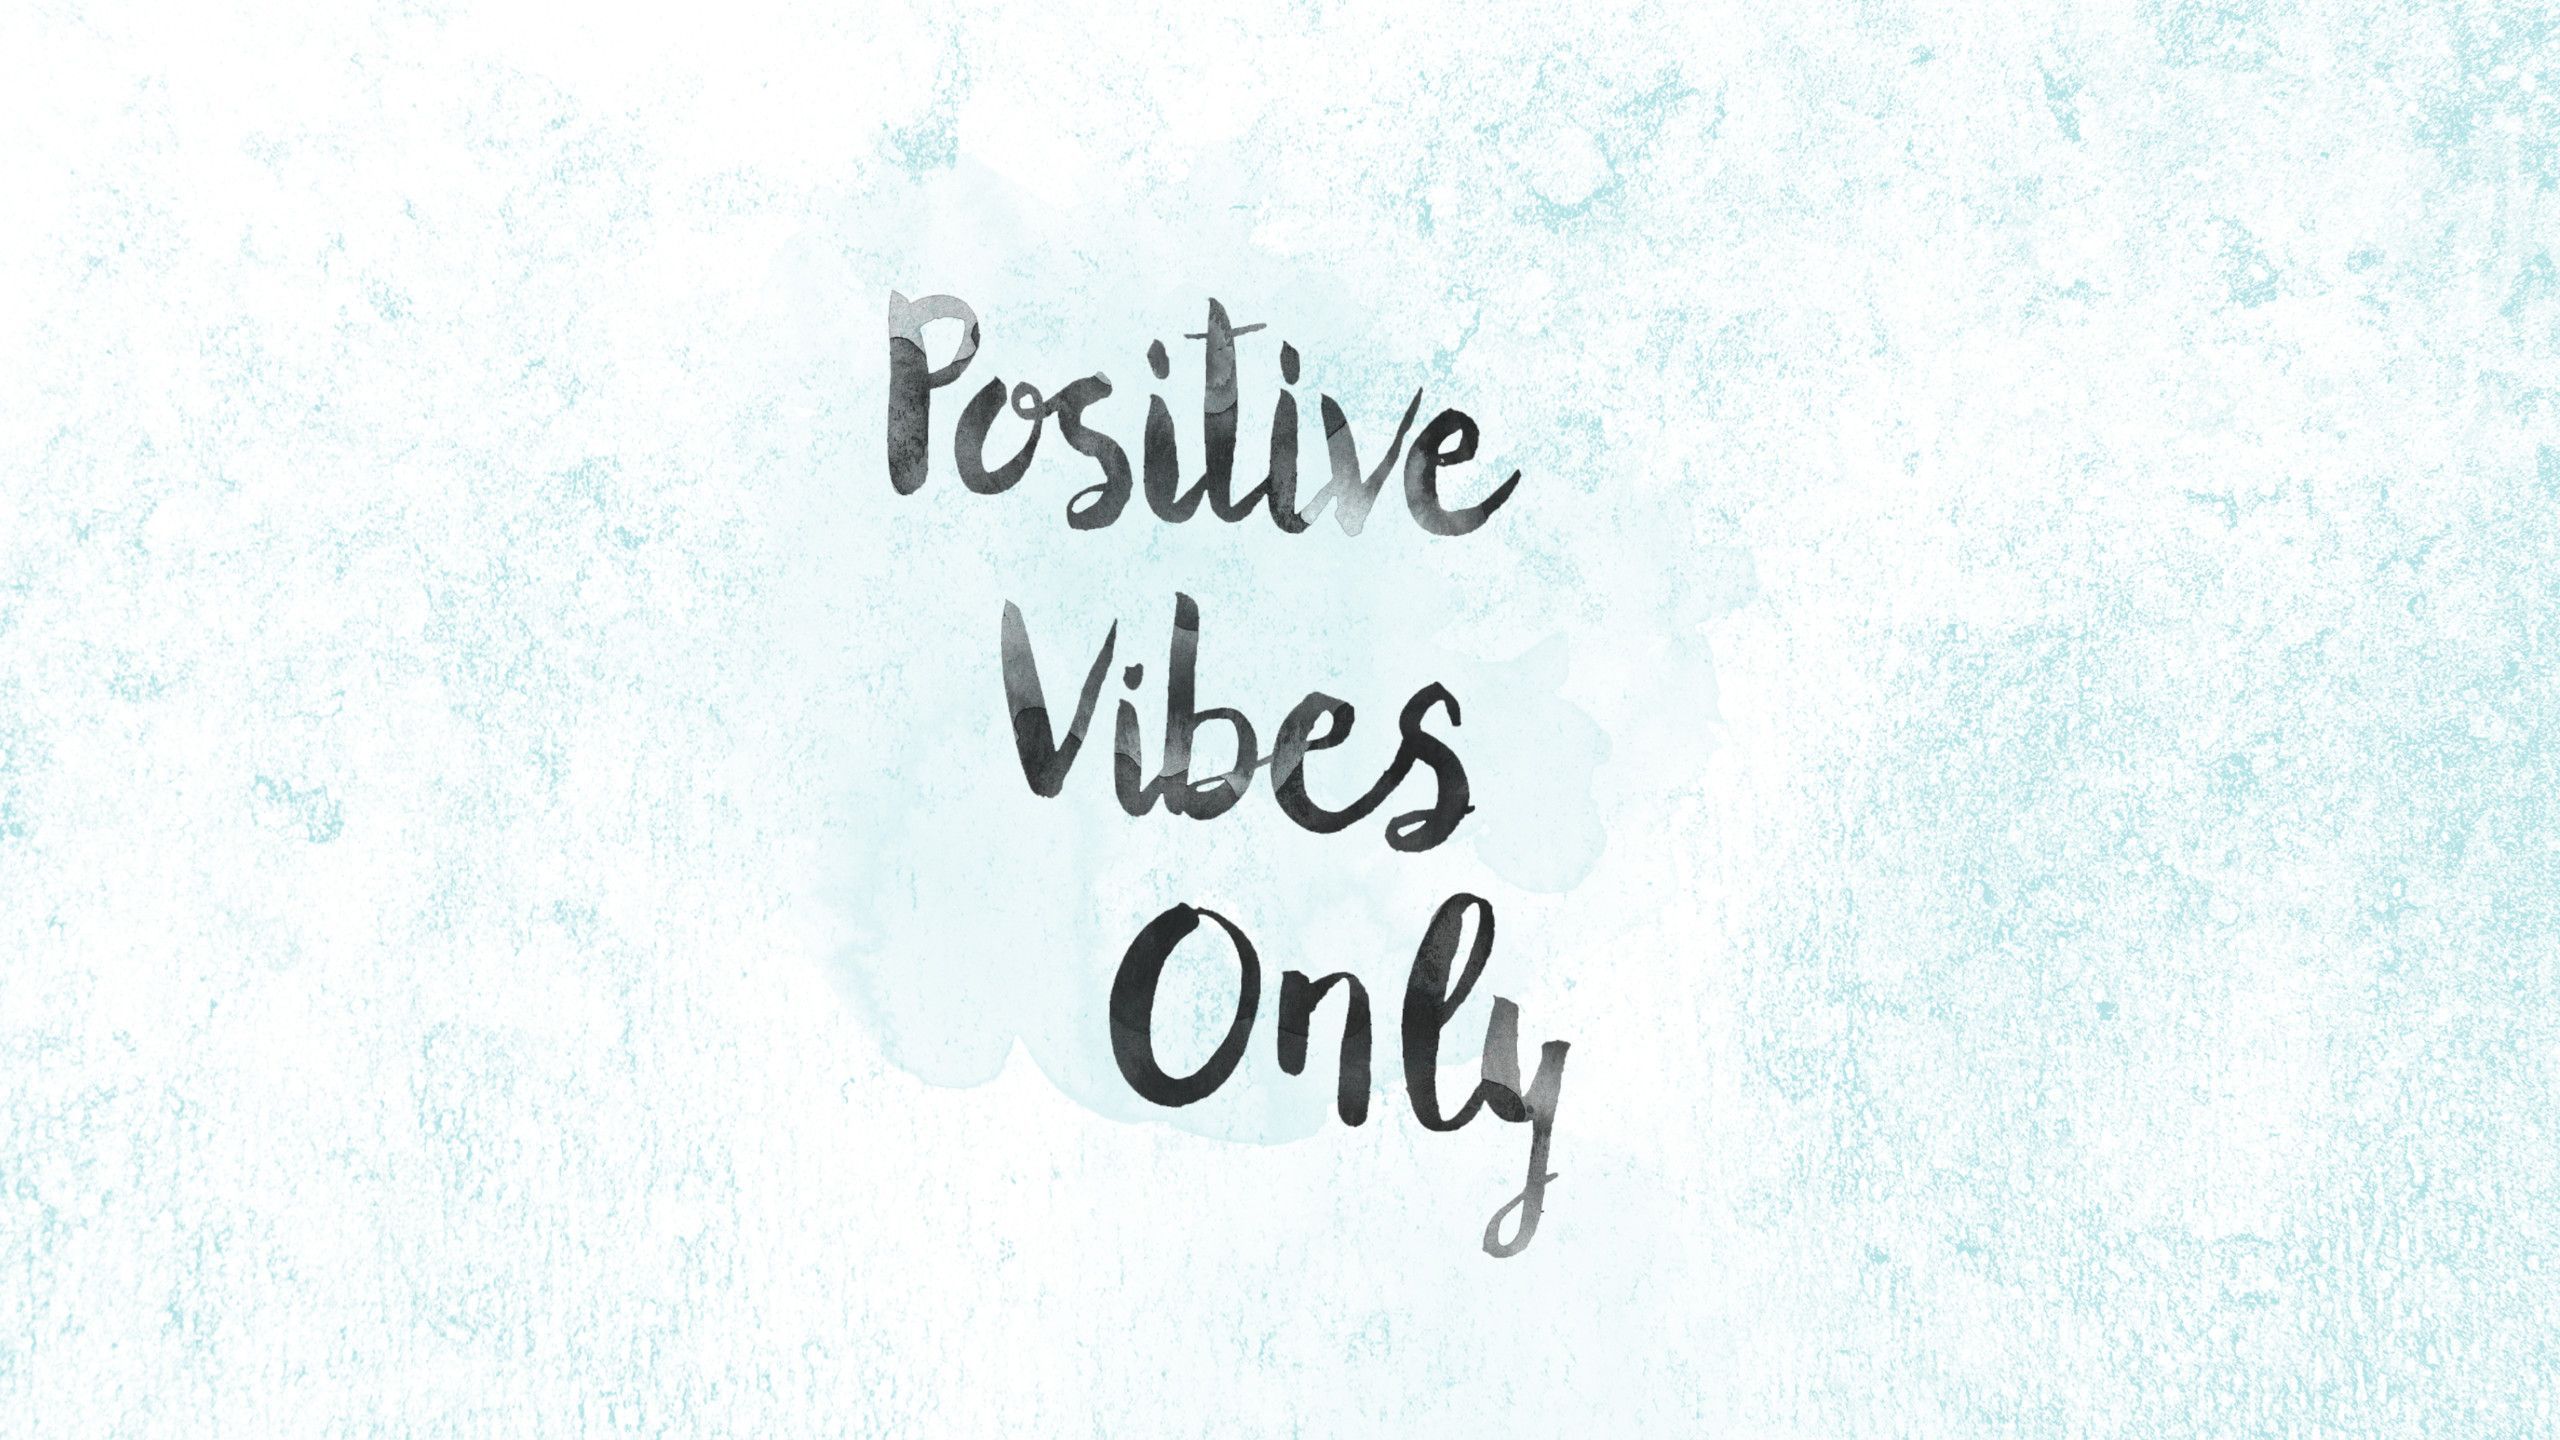 Positive Vibes Only Wallpapers - Wallpaper Cave.